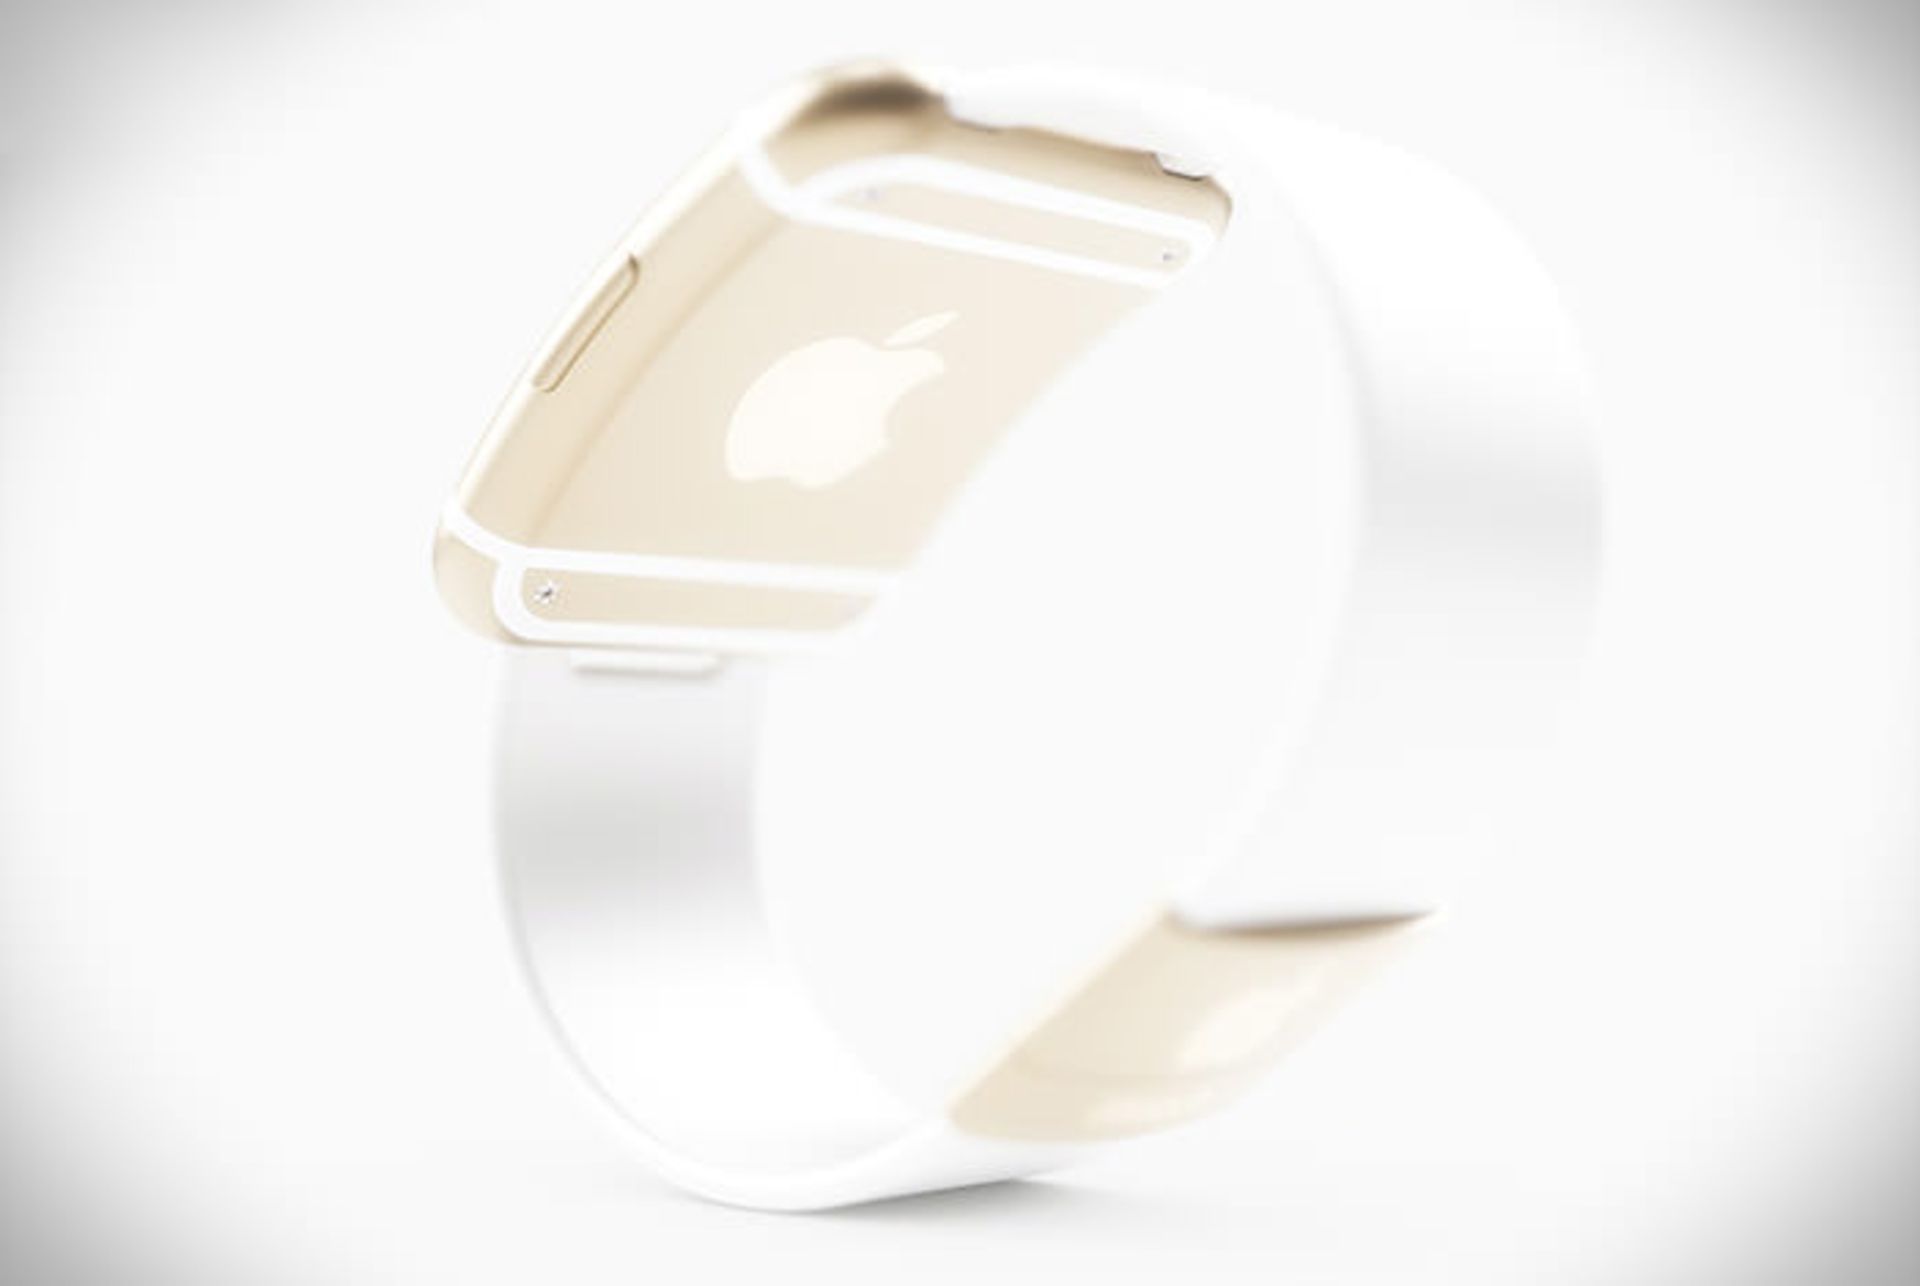 8Apple-iWatch-concept-shows-dreamy-curves-iPhone-esque-looks